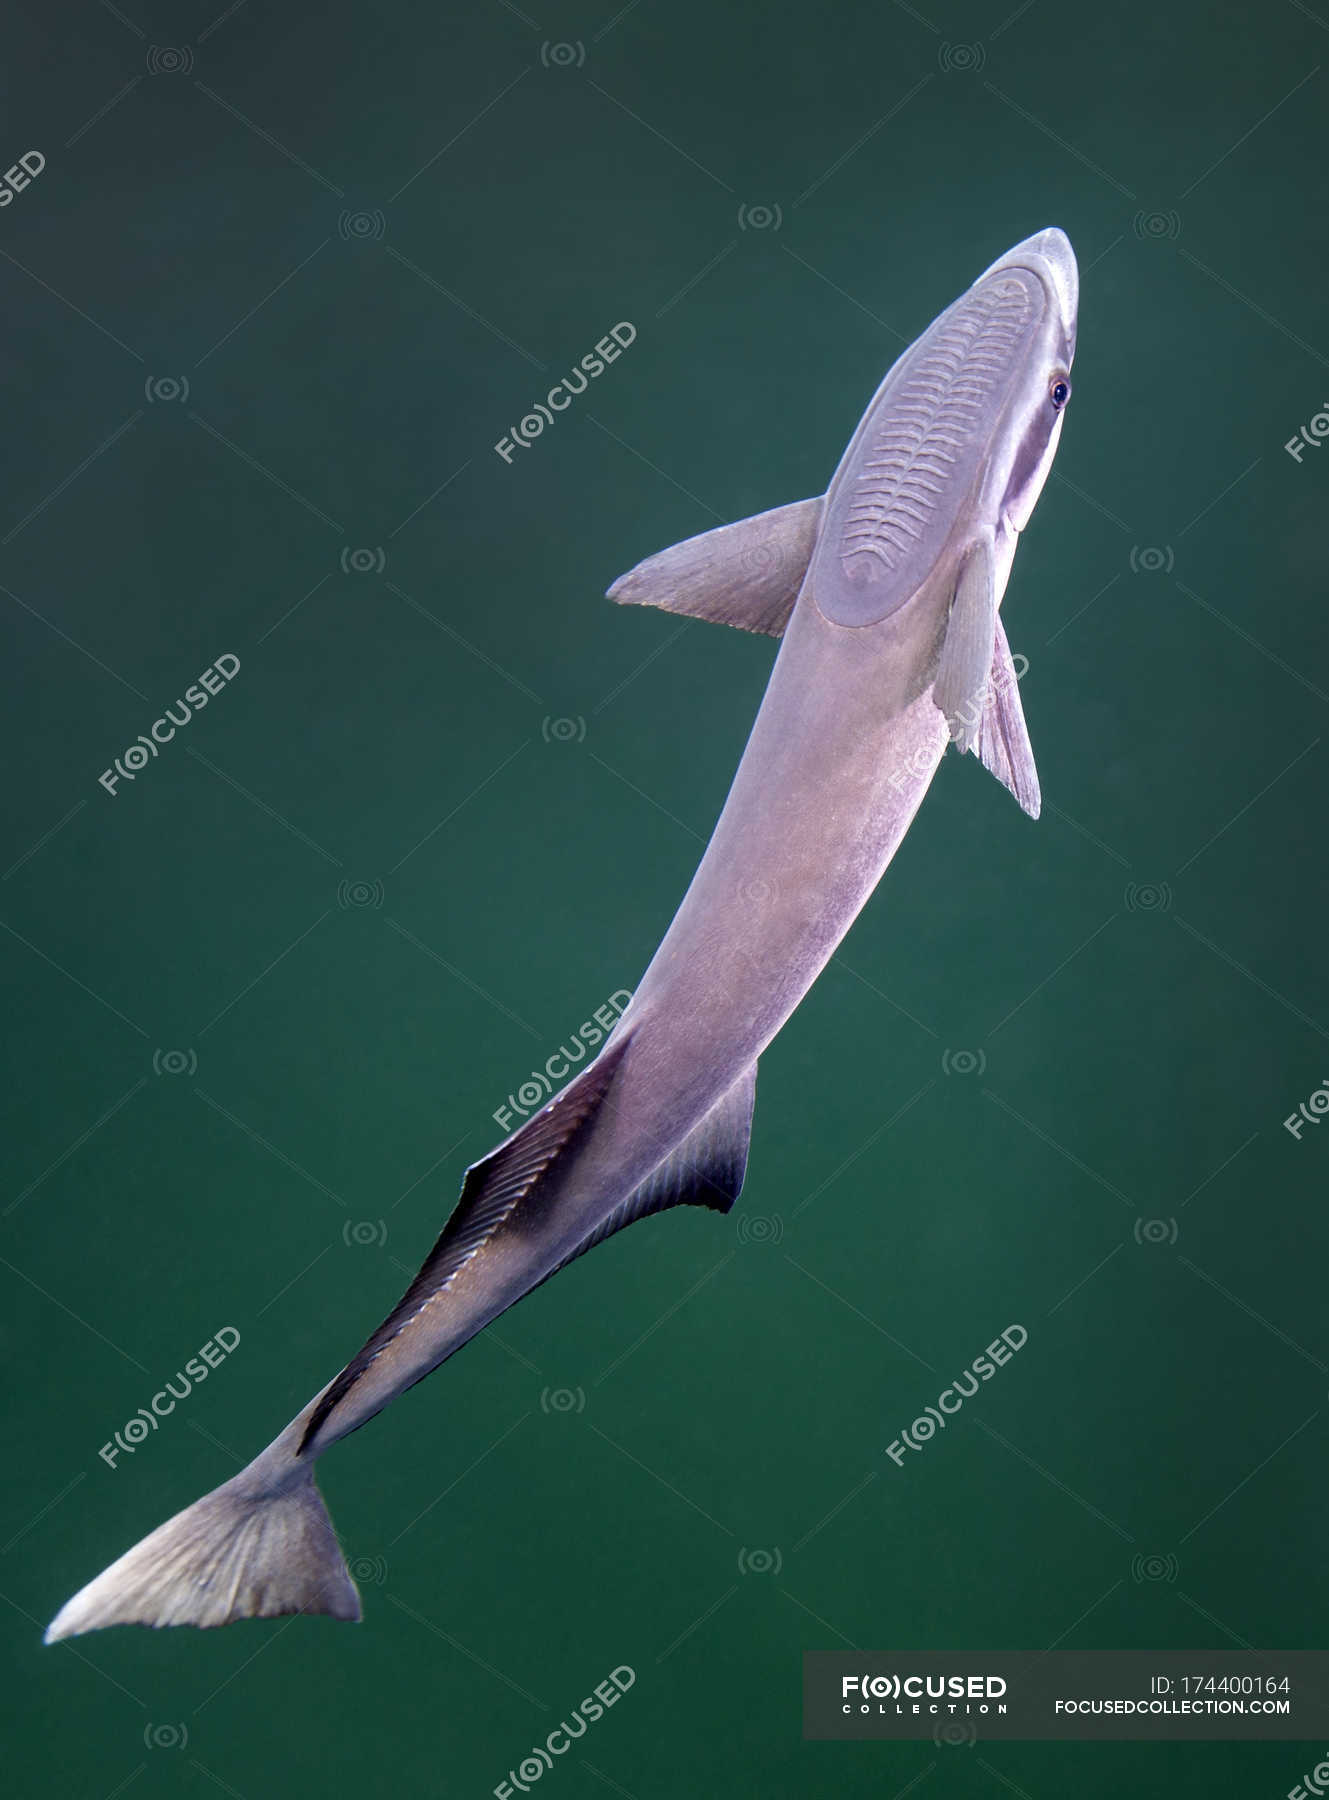 Remora fish looking for host to ride — gulf of mexico, side view .